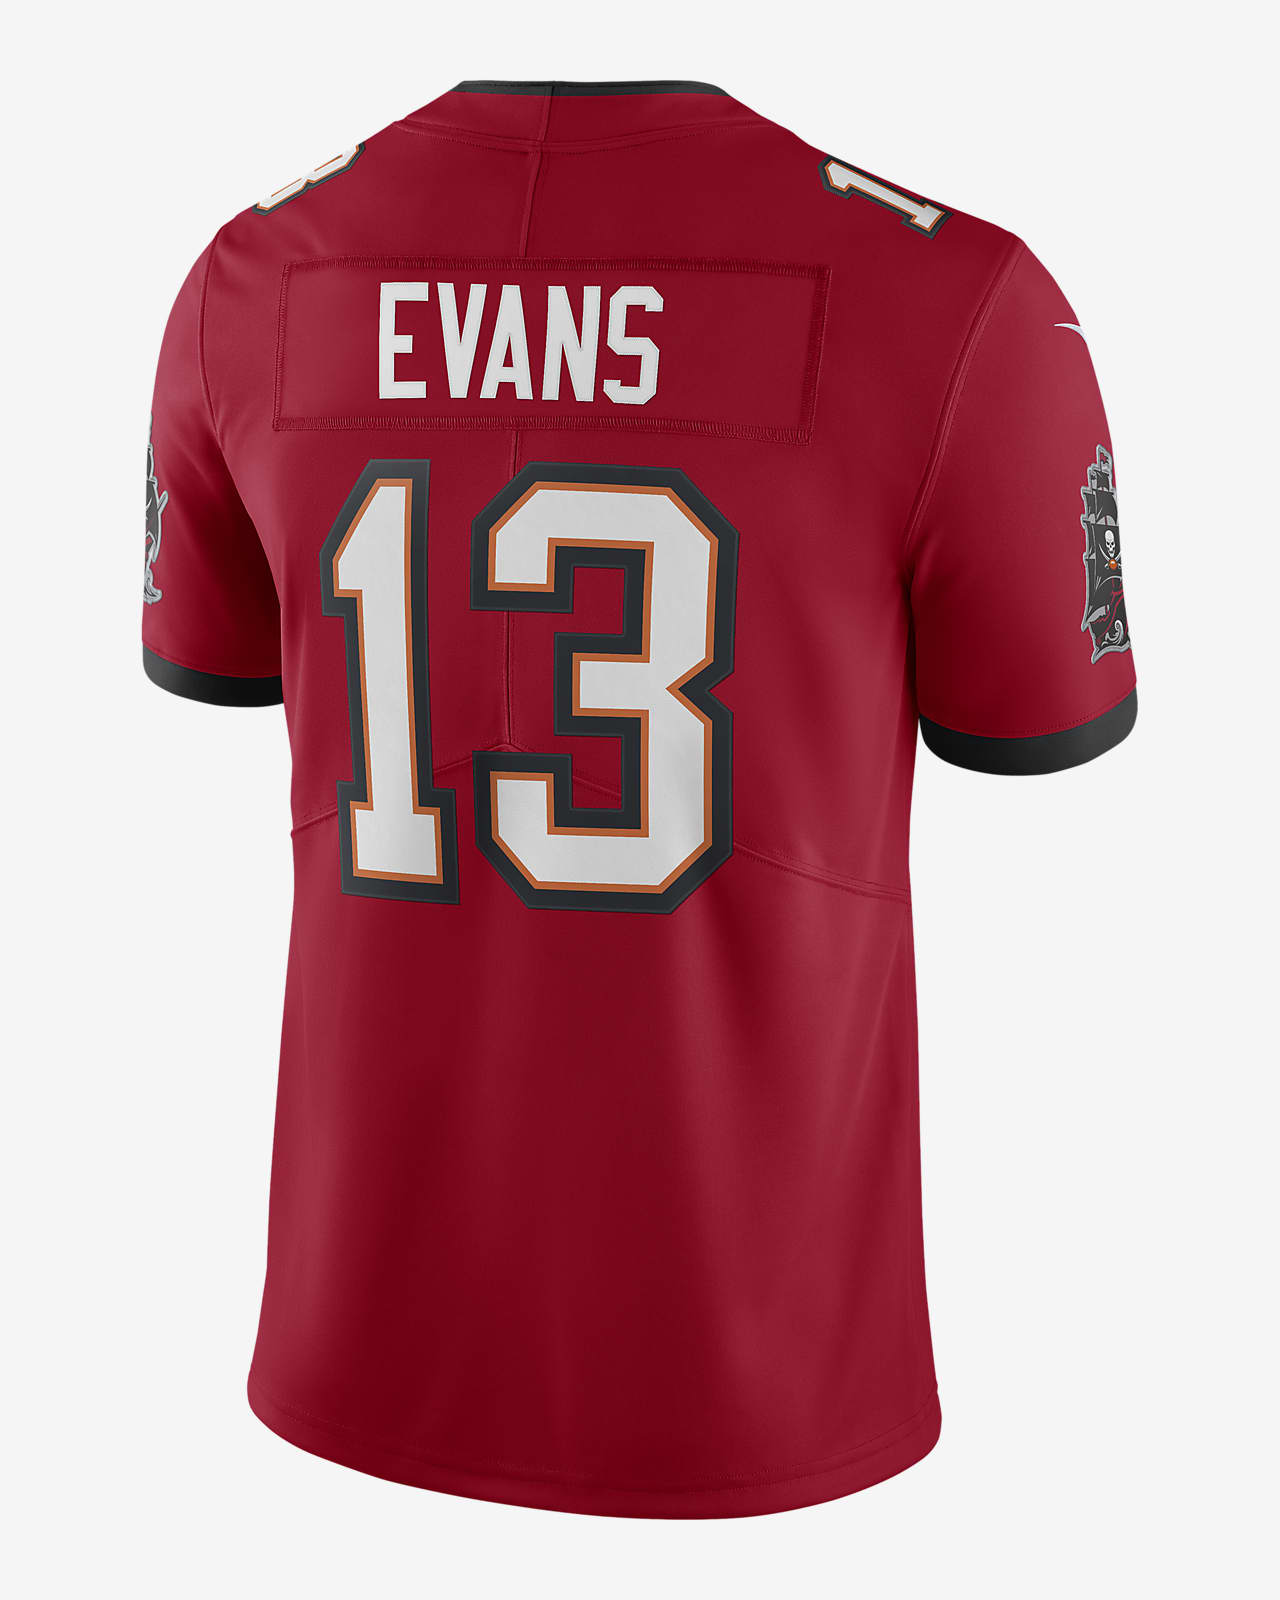 mike evans signed jersey